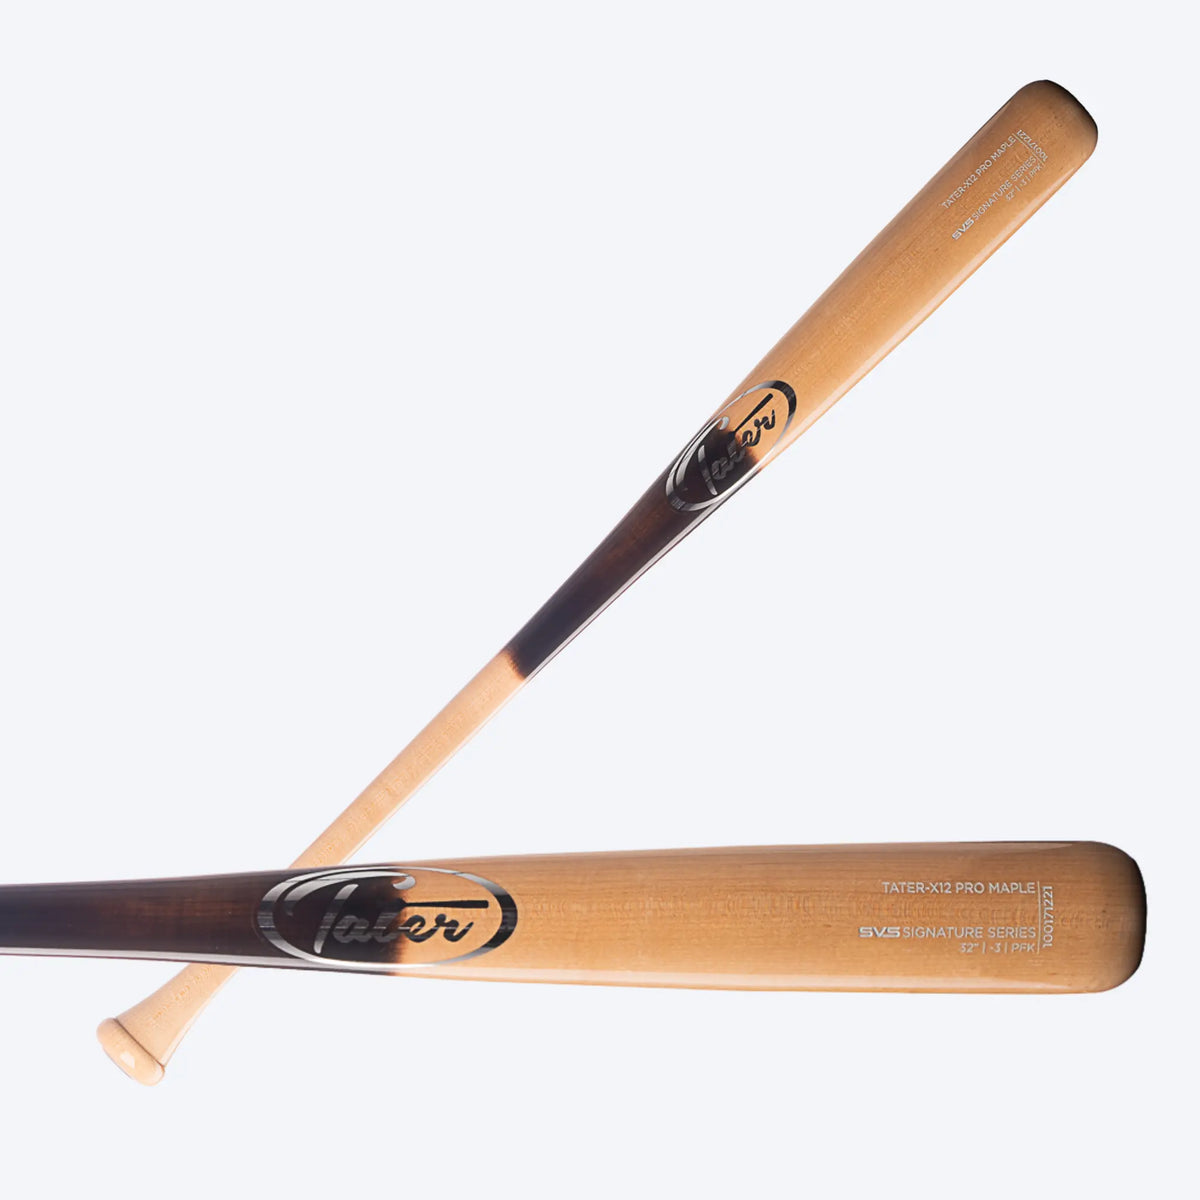 A high-quality wooden baseball bat with a dark brown pine tar grip, showcasing the Tater Baseball logo near the handle.This image features two Tater X12 Pro Maple baseball bats in a crossed position against a clear background. The top bat is displayed with the handle towards us, showing off the smooth pine tar finish, while the bottom bat presents the barrel with the brand&#39;s logo clearly visible, suggesting a bat well-suited for high school players due to its balance and craftsmanship.